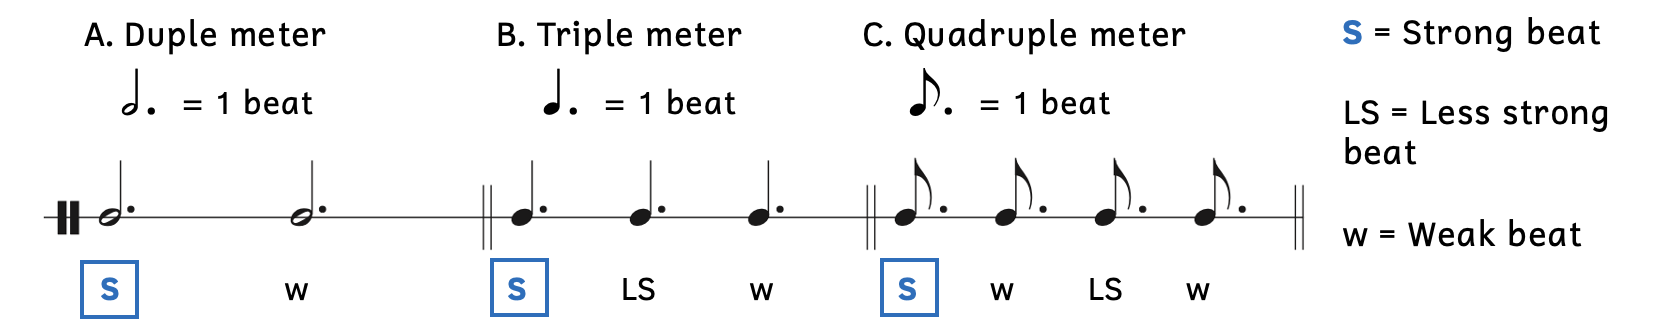 Weighted beats in compound meters. A. In duple meters, the downbeat is strong and beat 2 is weak. B. In triple meters, the downbeat is strongest; beat 2 is less strong; and beat 3 is weak. C. In quadruple meters, the downbeat is strongest; beat 3 is less strong; and beats 2 and 4 are weak.